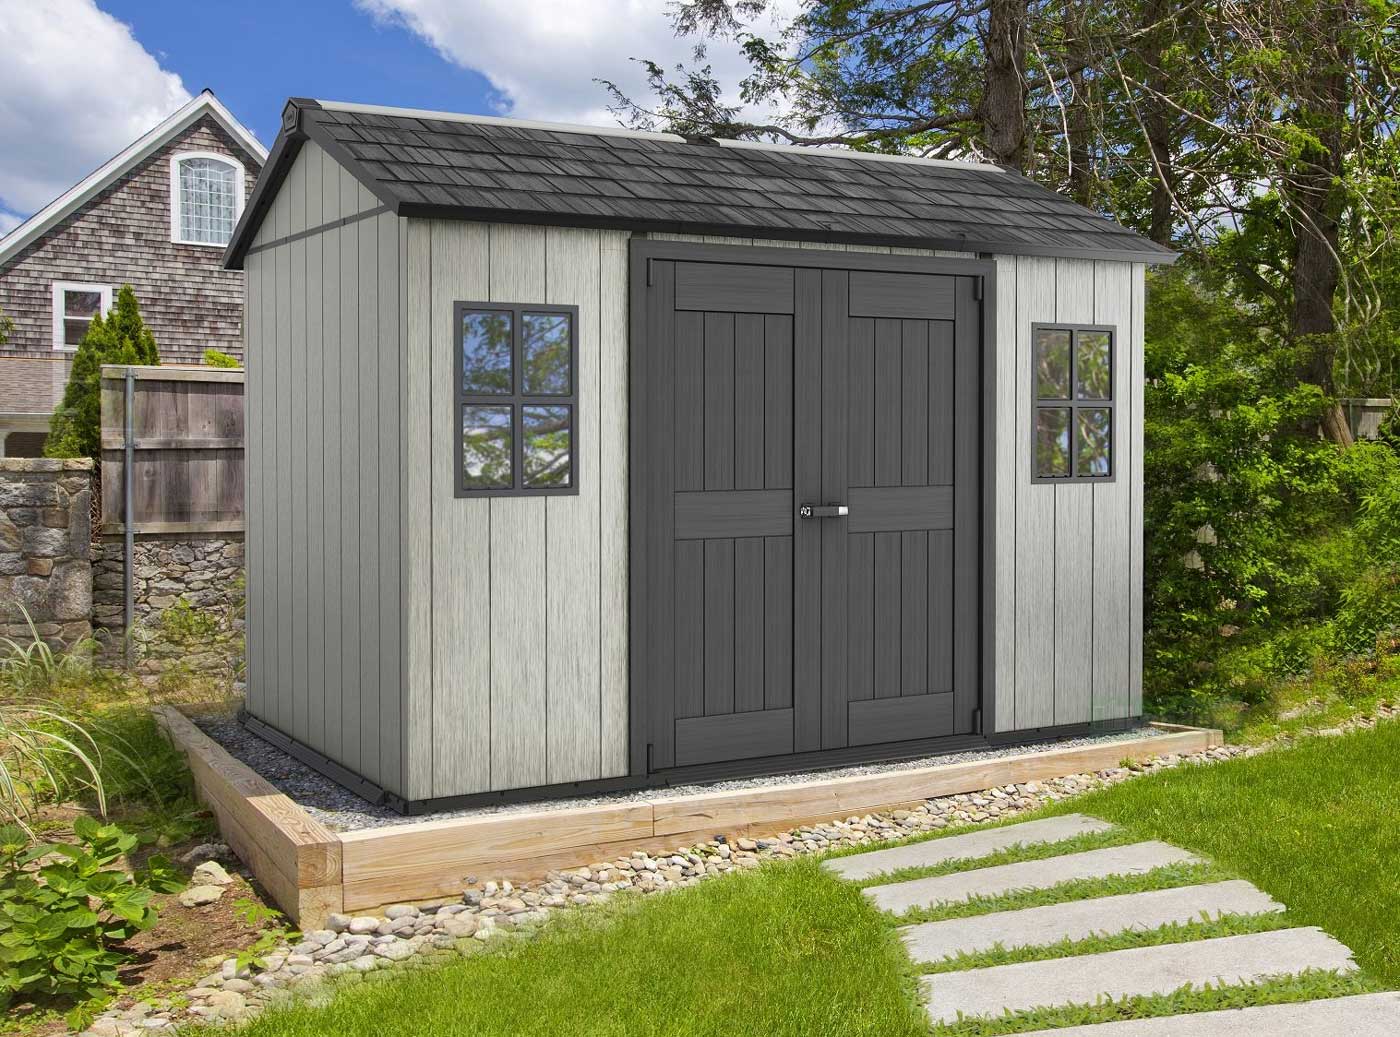 KETER OAKLAND 1175 SHED 11'x7.5' 3.5mx2.3m DISCOUNTED!